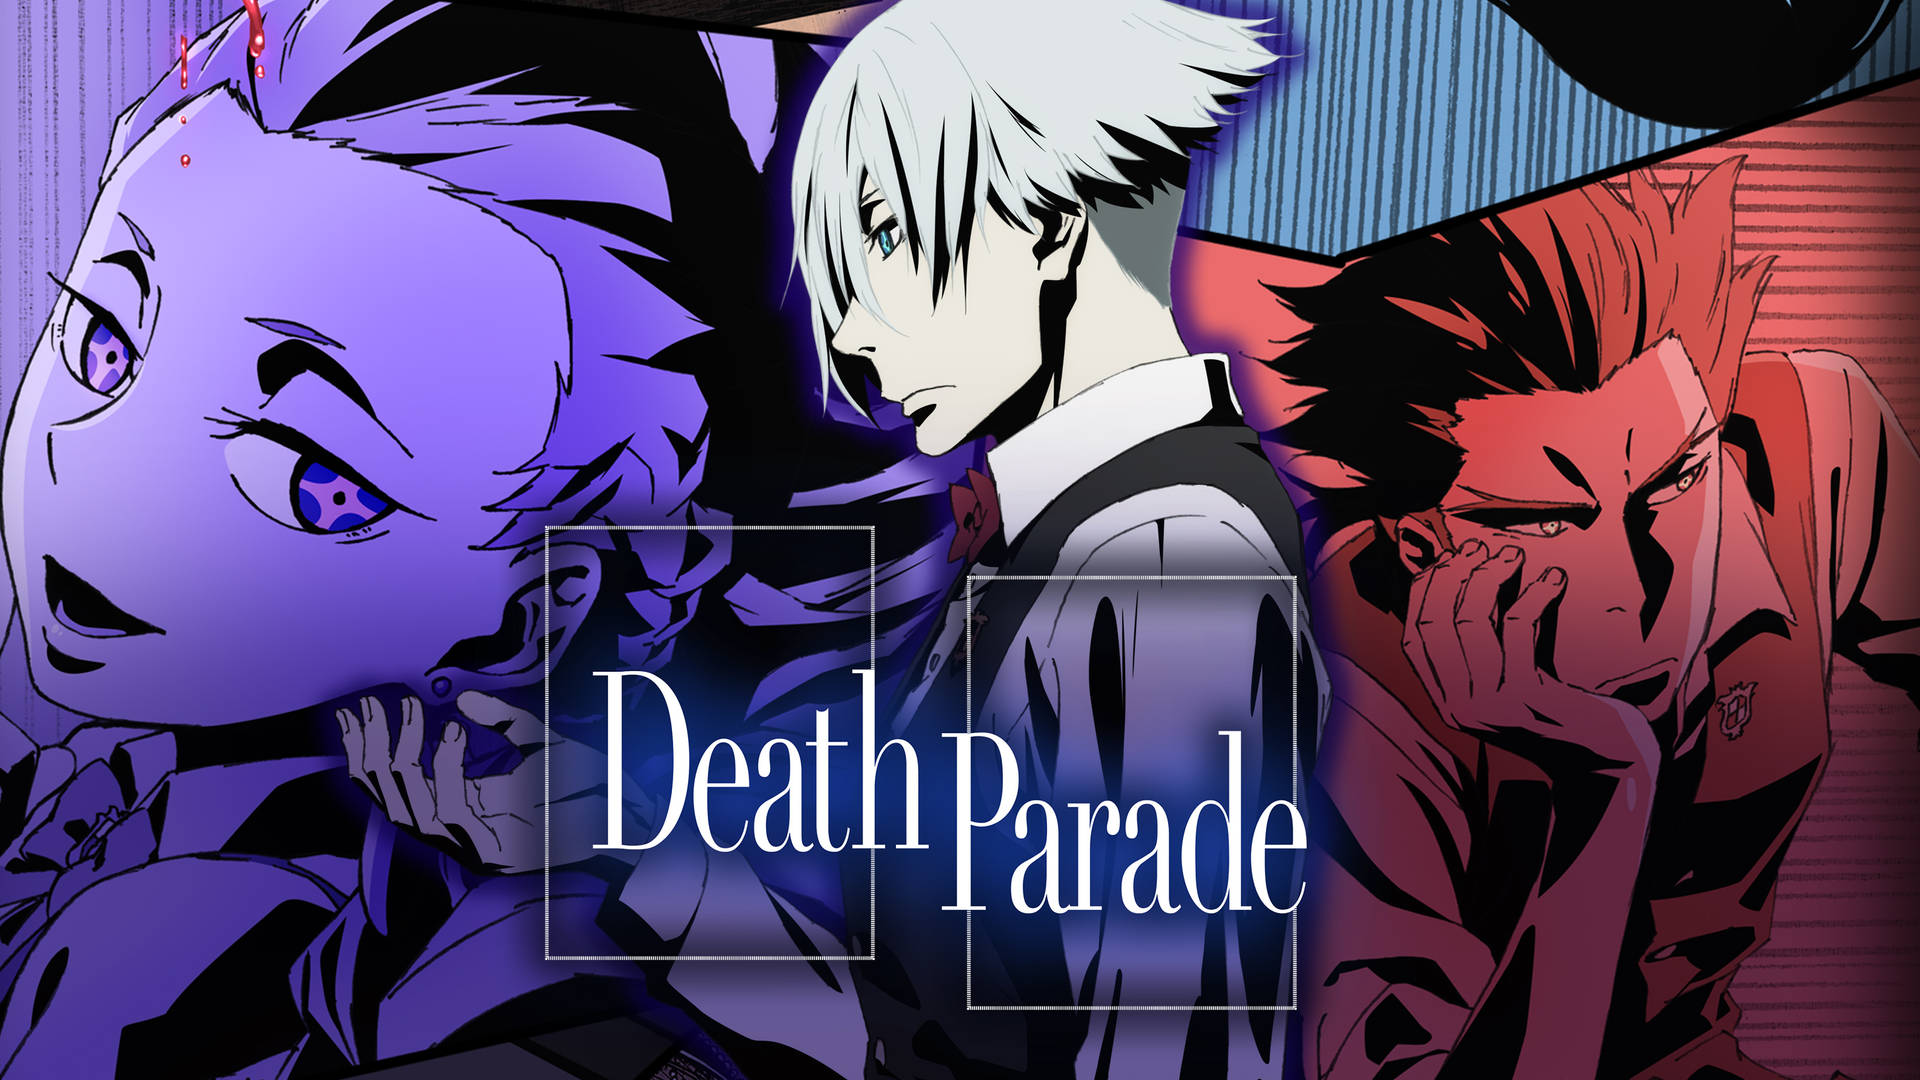 Cool Death Parade Poster Art Background